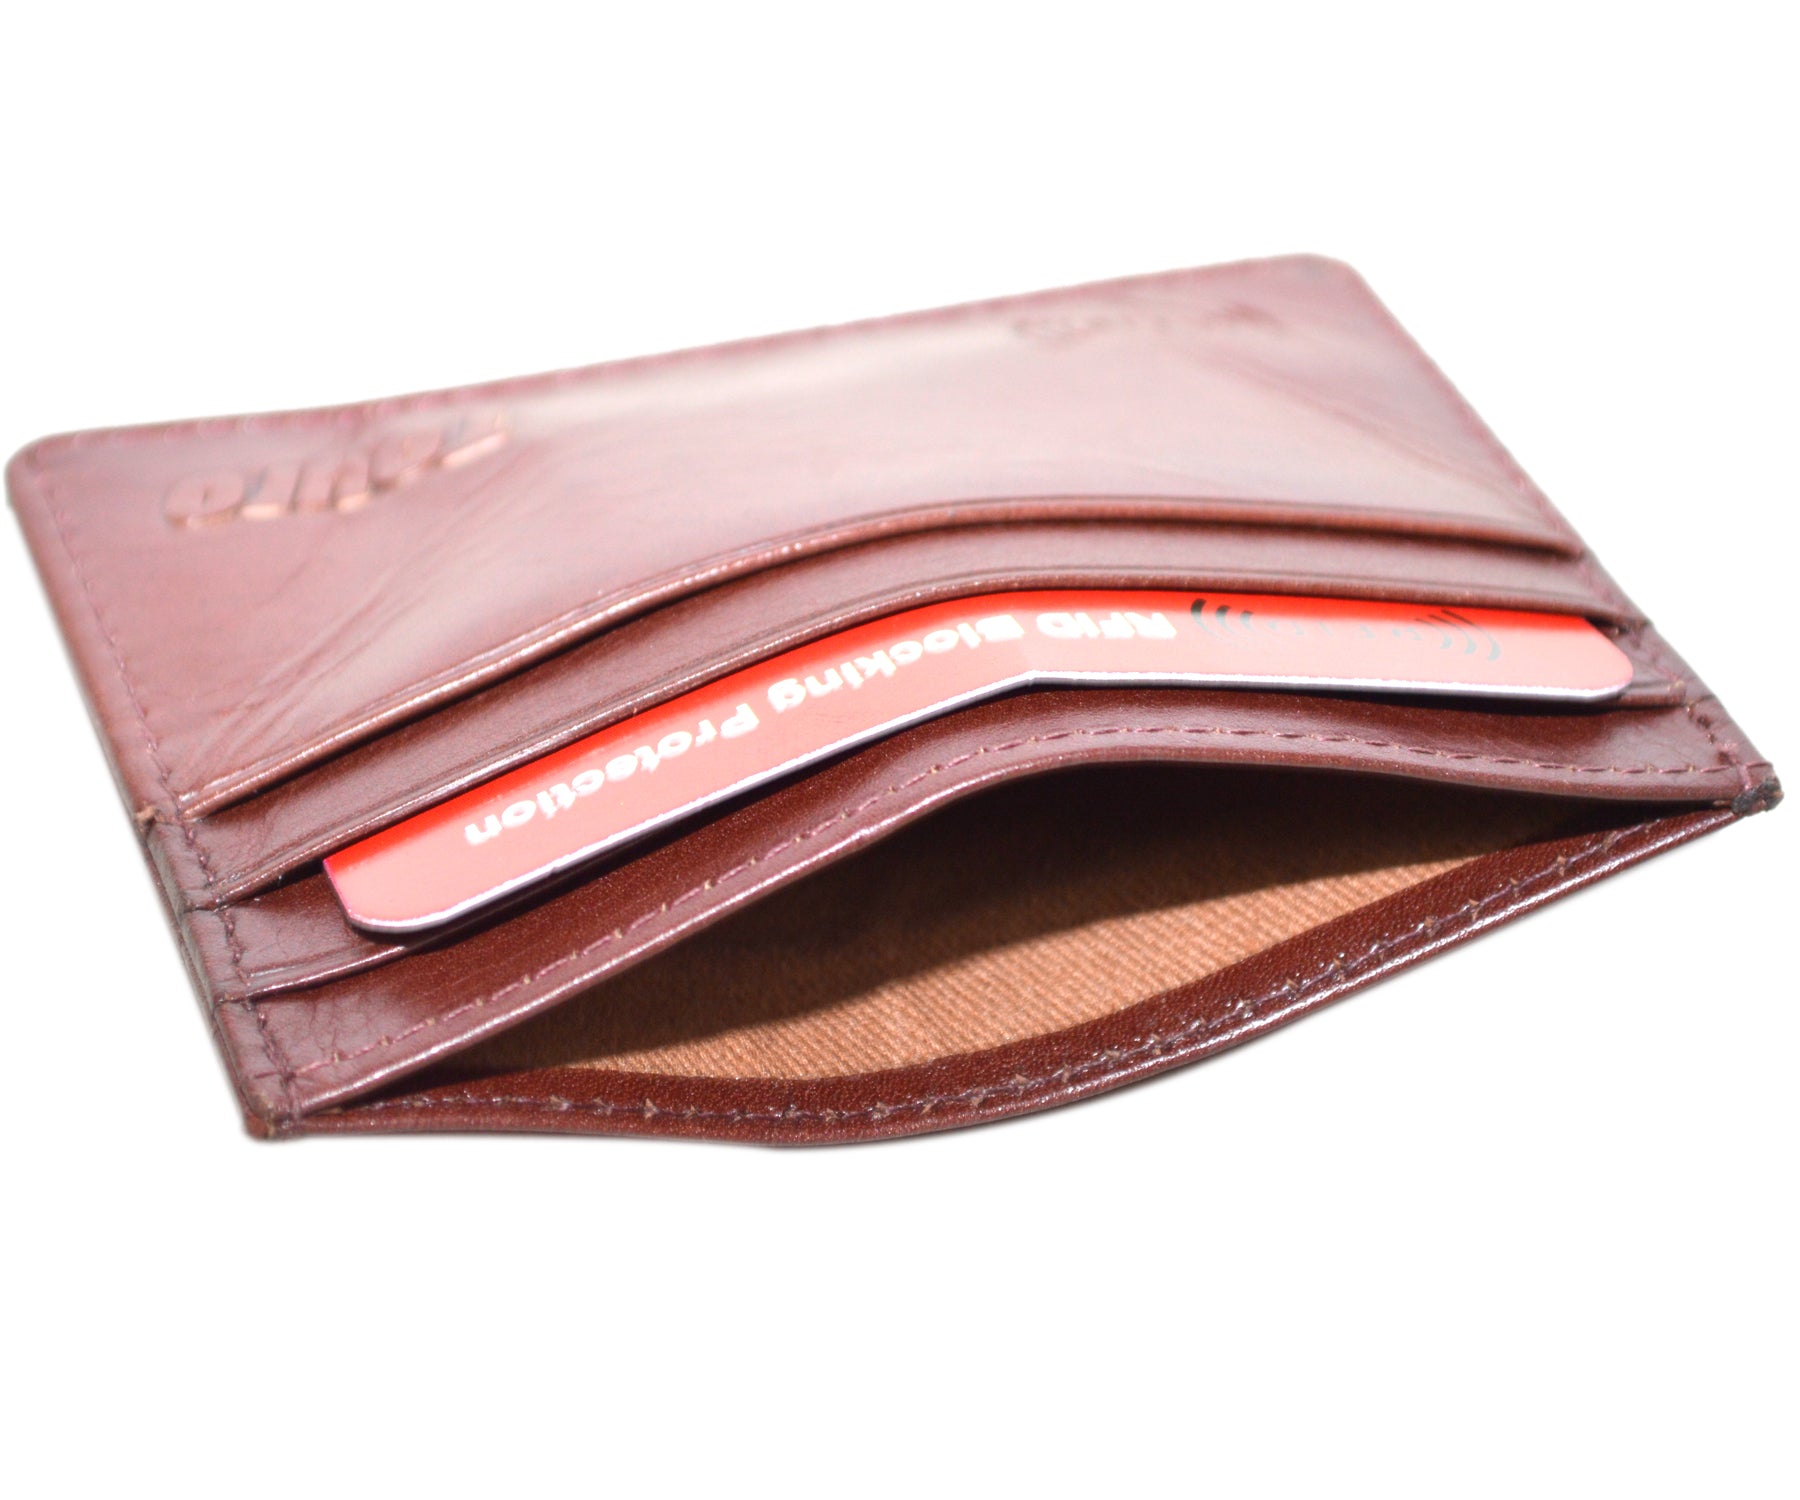 Buy SHREE FASHION Synthetic Leather Men's Wallet at Amazon.in